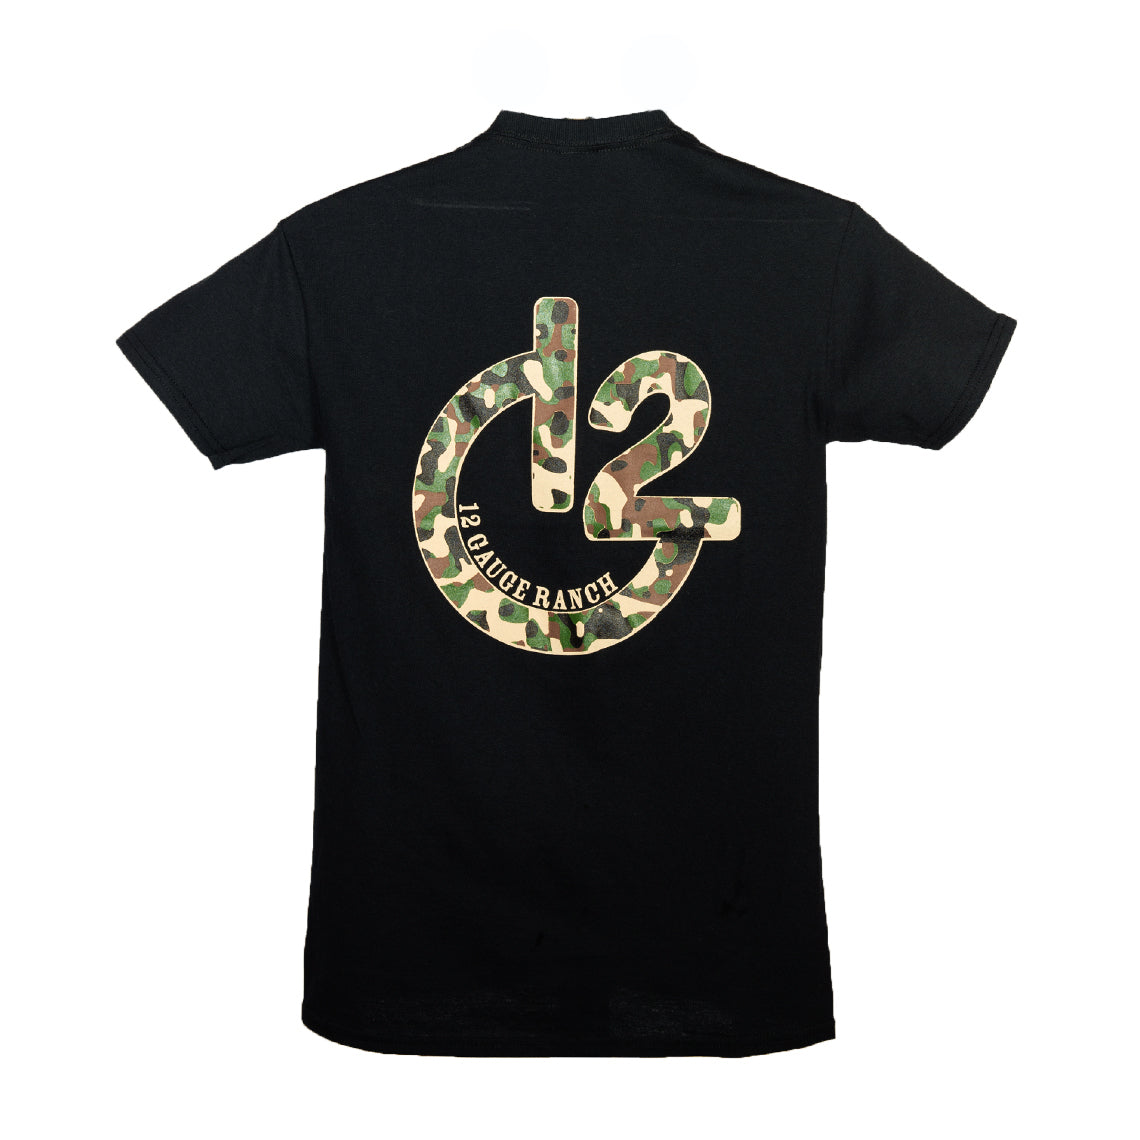 12 Gauge Ranch Black with Camo Short Sleeve T-Shirt, Apparel, 12 Gauge Ranch, 12 Gauge Ranch Ranch  12 Gauge Ranch